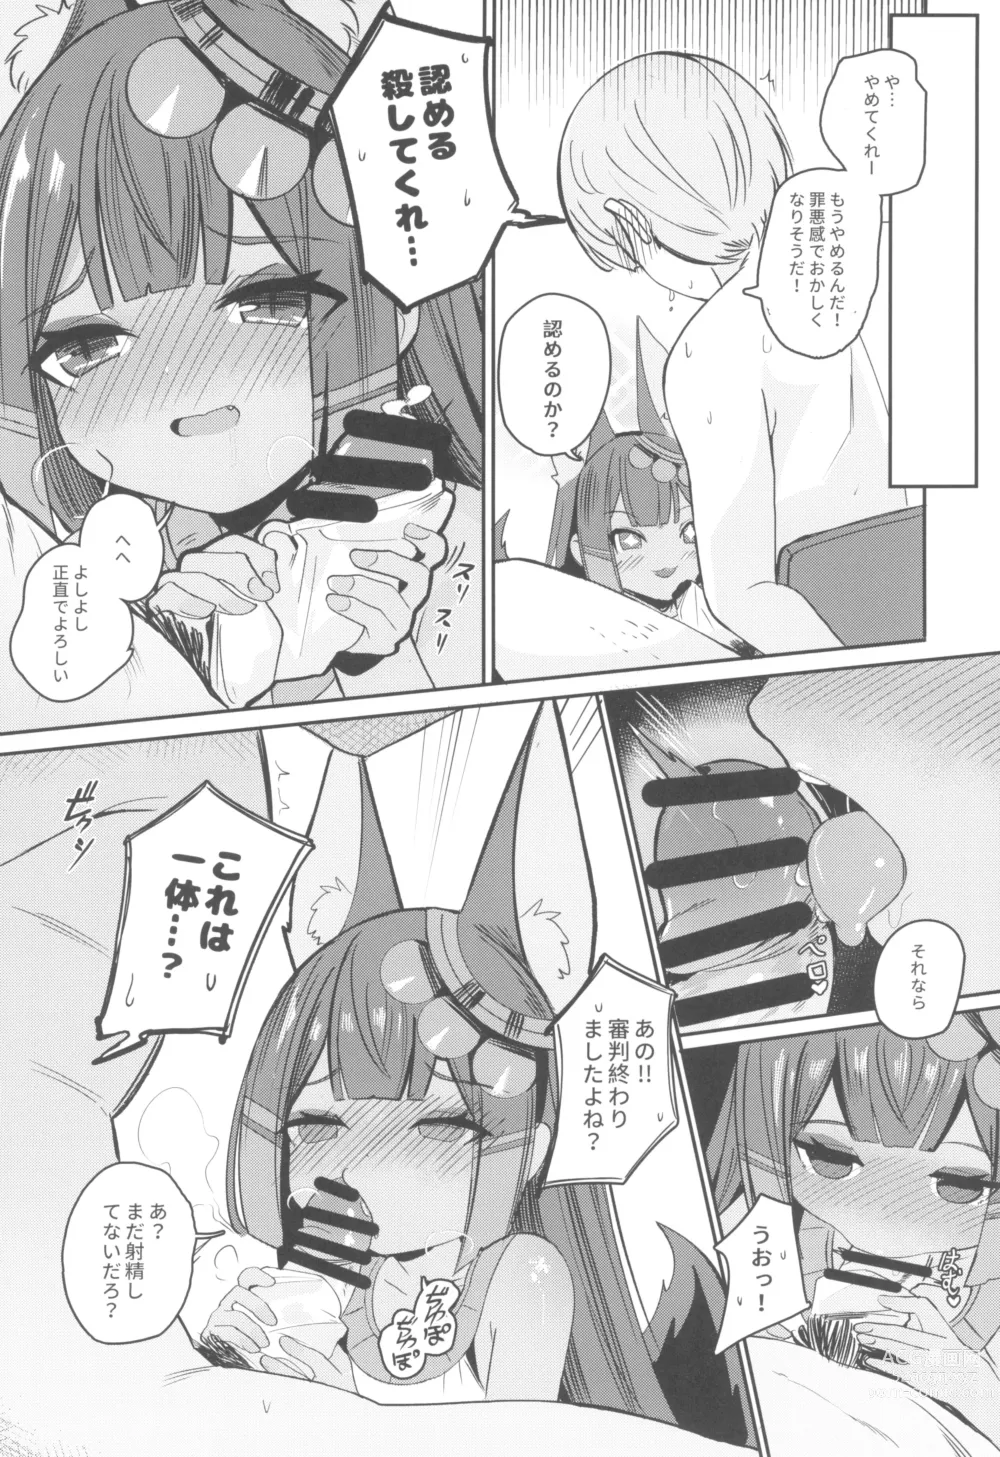 Page 12 of doujinshi Anubis no Ero Shisha Shinpan - She is the oldest FBI in human history and will find souls who have erotic thoughts about loli